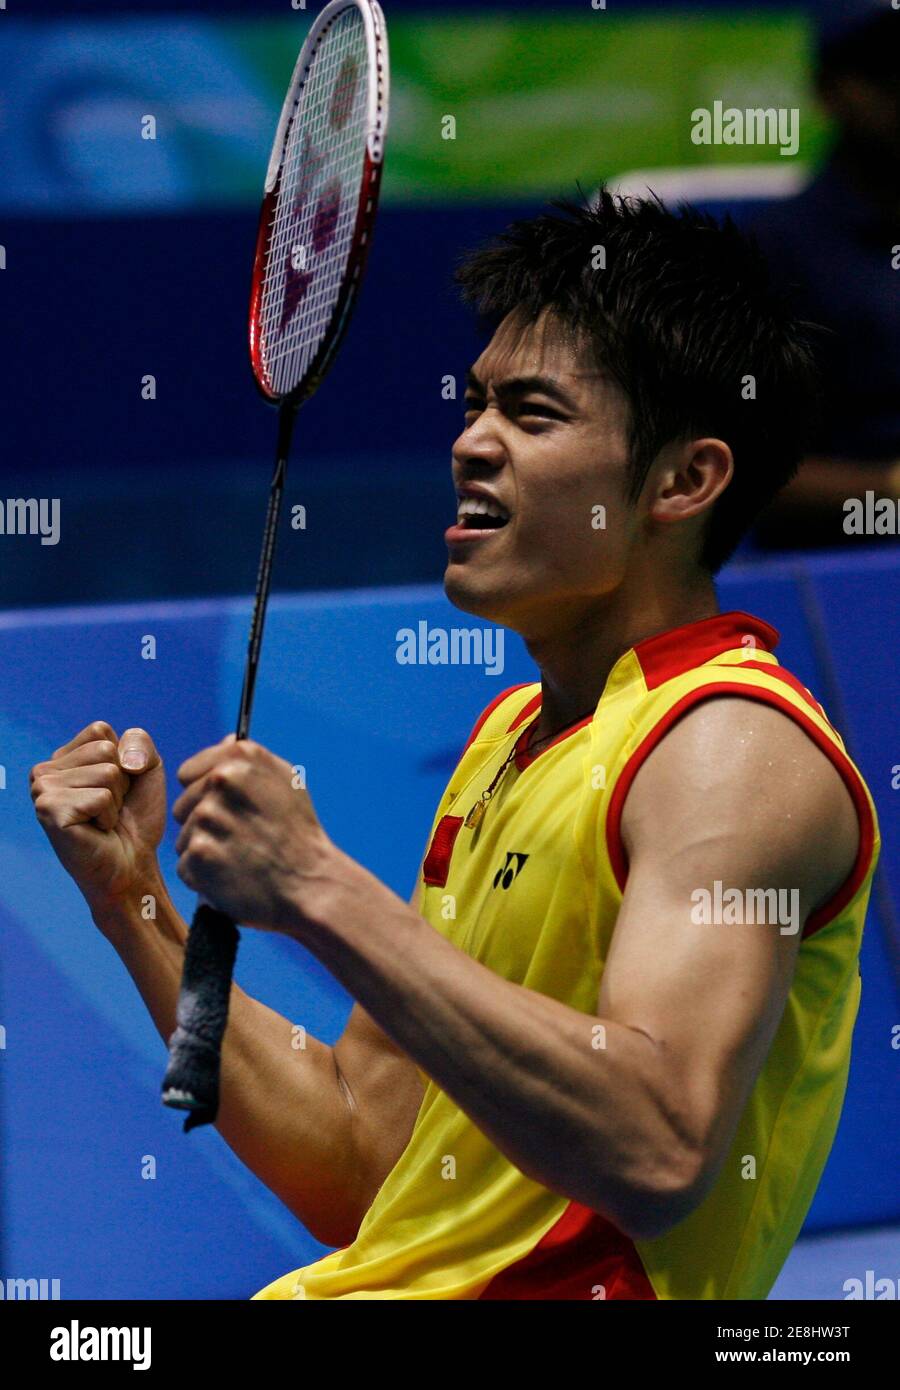 Lin Dan of China celebrates his victory over Peter Hoeeg Gade of Denmark in their men's singles quarter-final badminton match at the Beijing 2008 Olympic Games, August 14, 2008.     REUTERS/Beawiharta (CHINA) Stock Photo